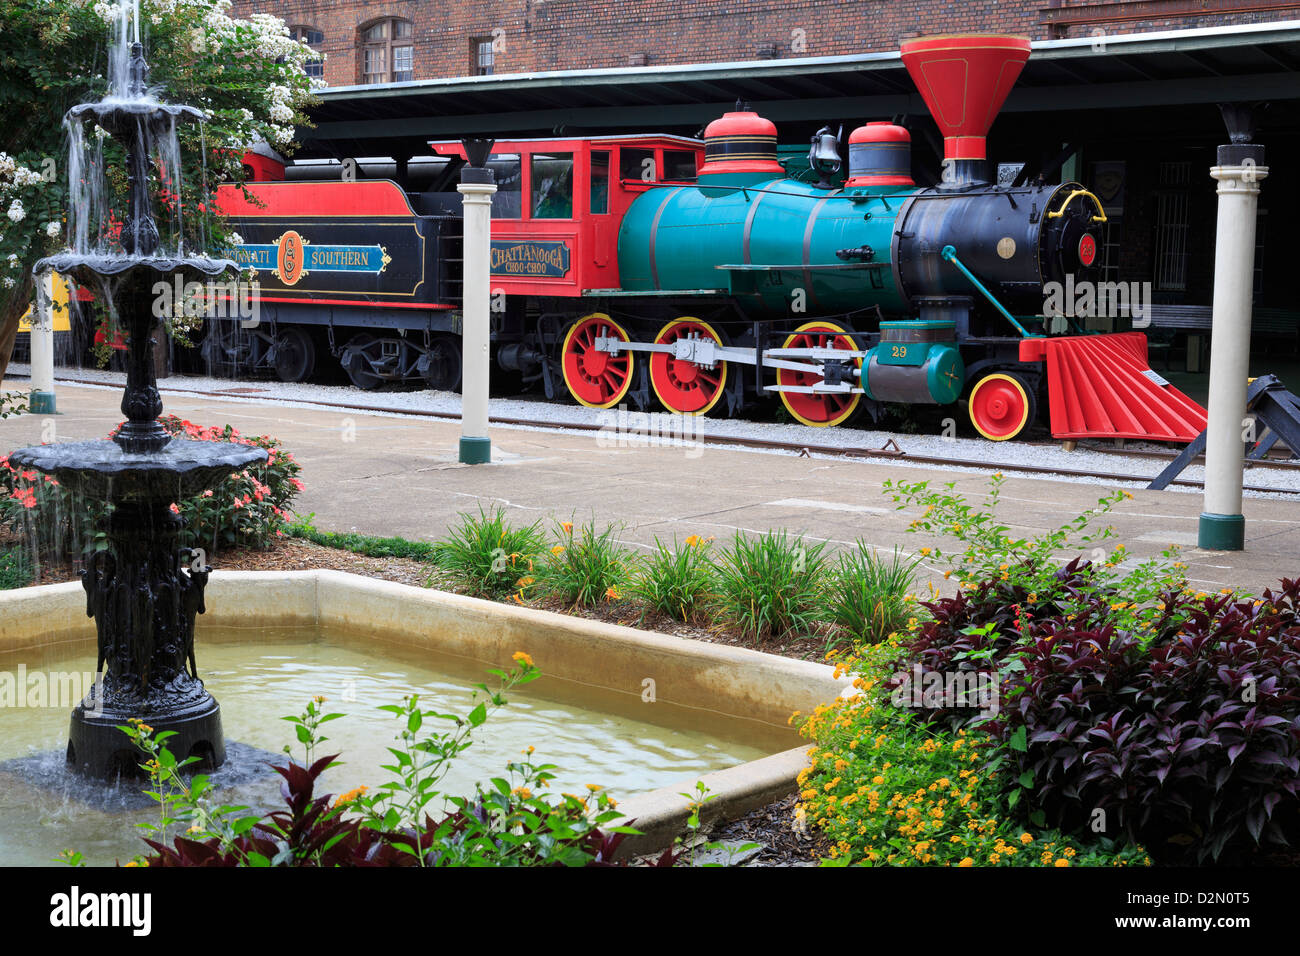 Locomotive at the Chattanooga Choo Choo, Chattanooga, Tennessee, United States of America, North America Stock Photo